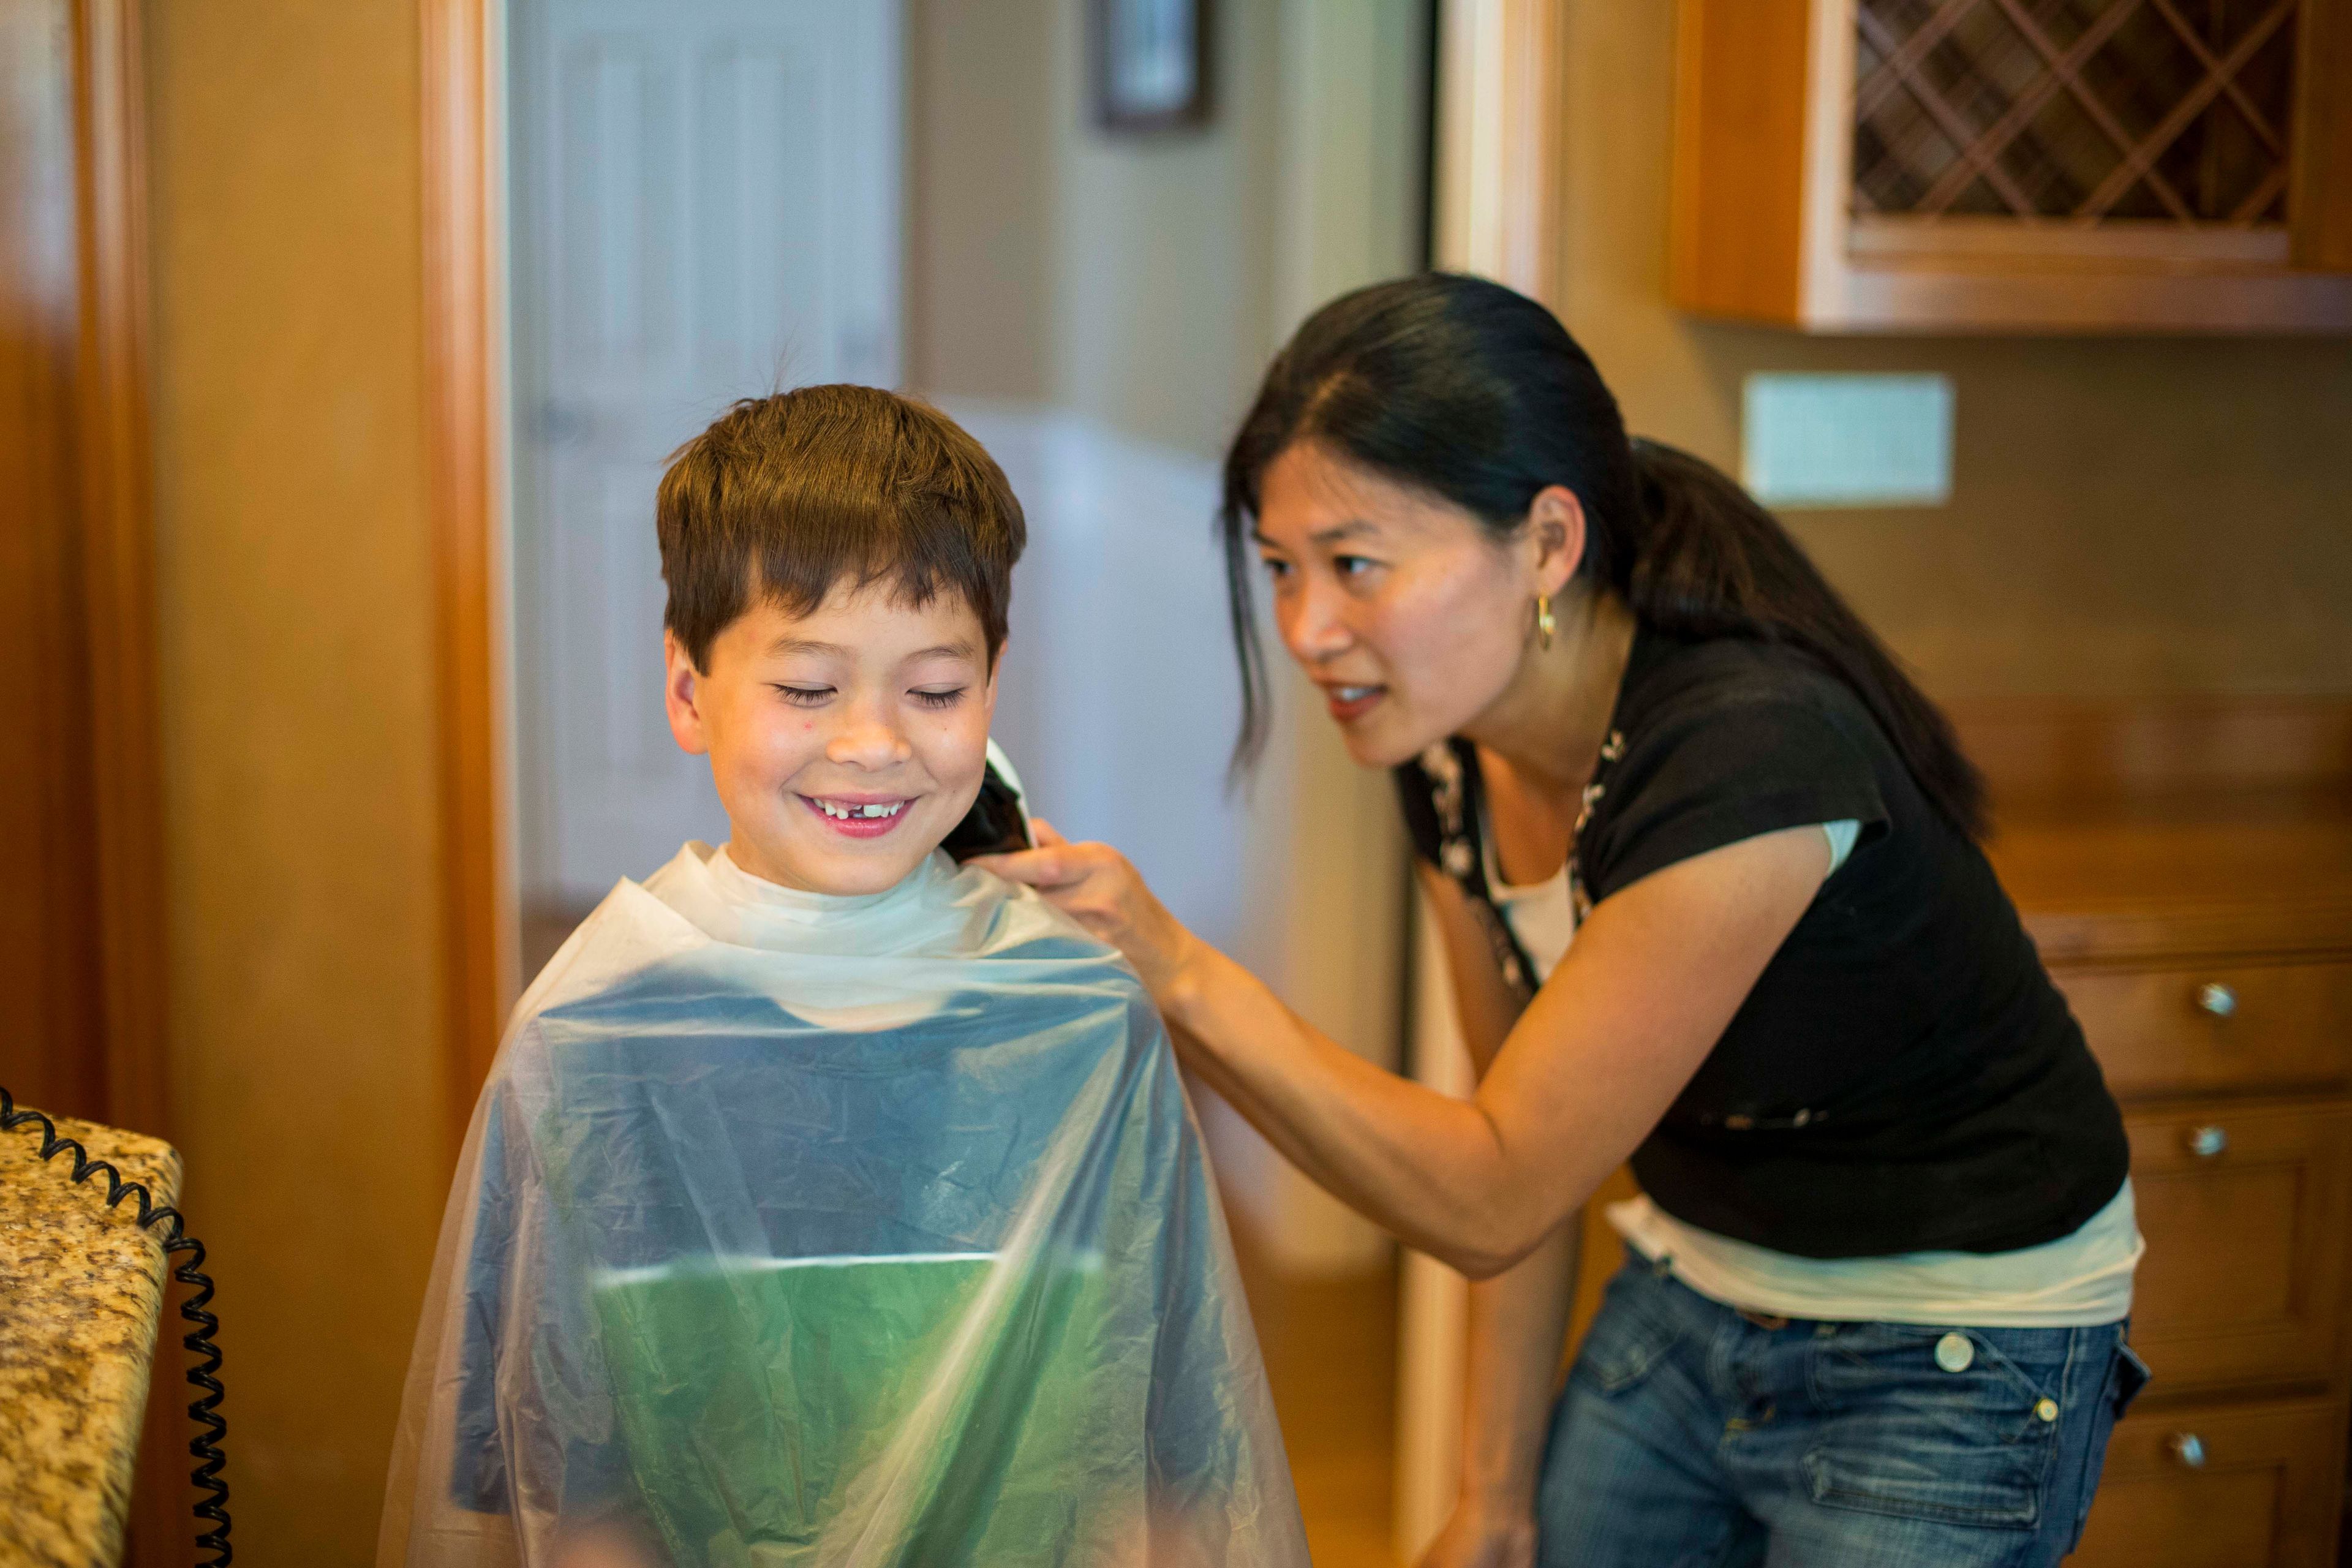 A mother cuts her son’s hair.